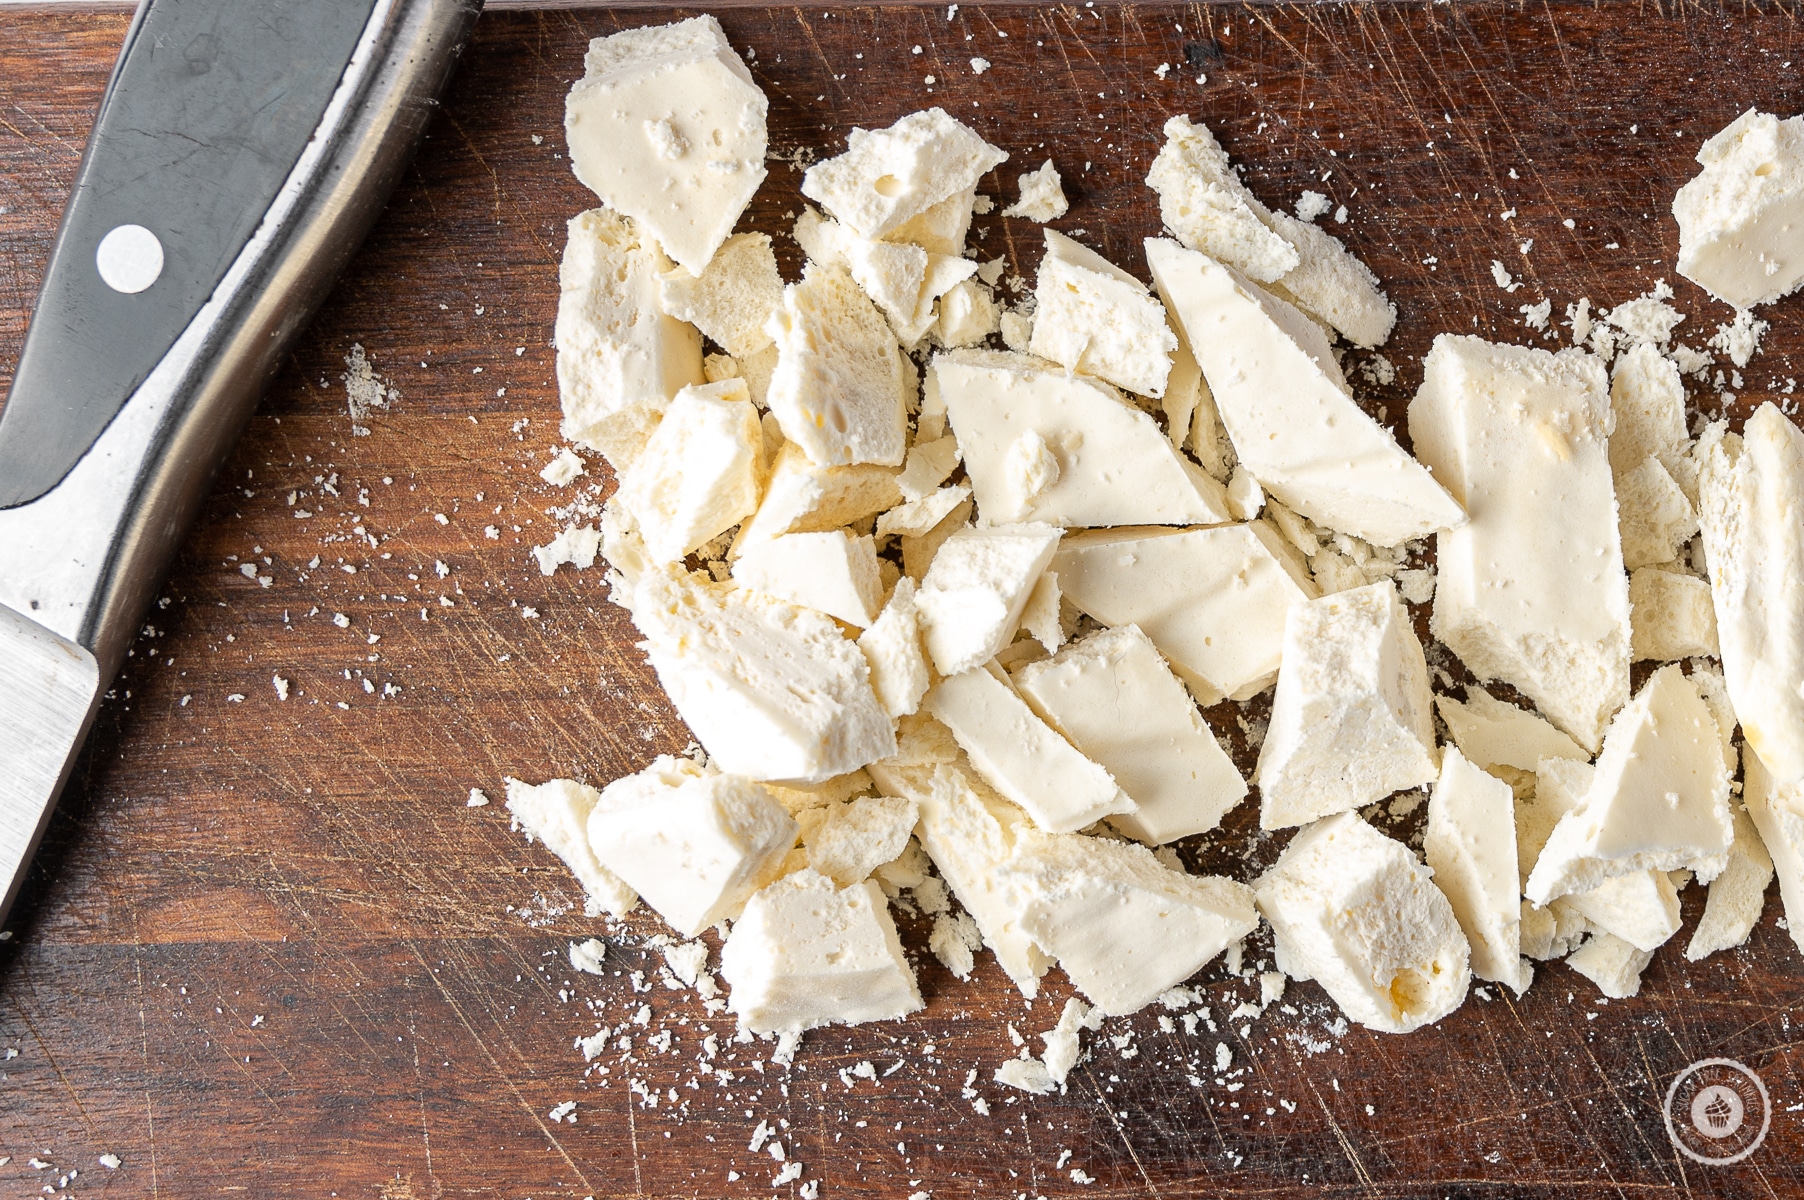 Frozen cheesecake chopped into small chunks on a rustic dark wood cutting board